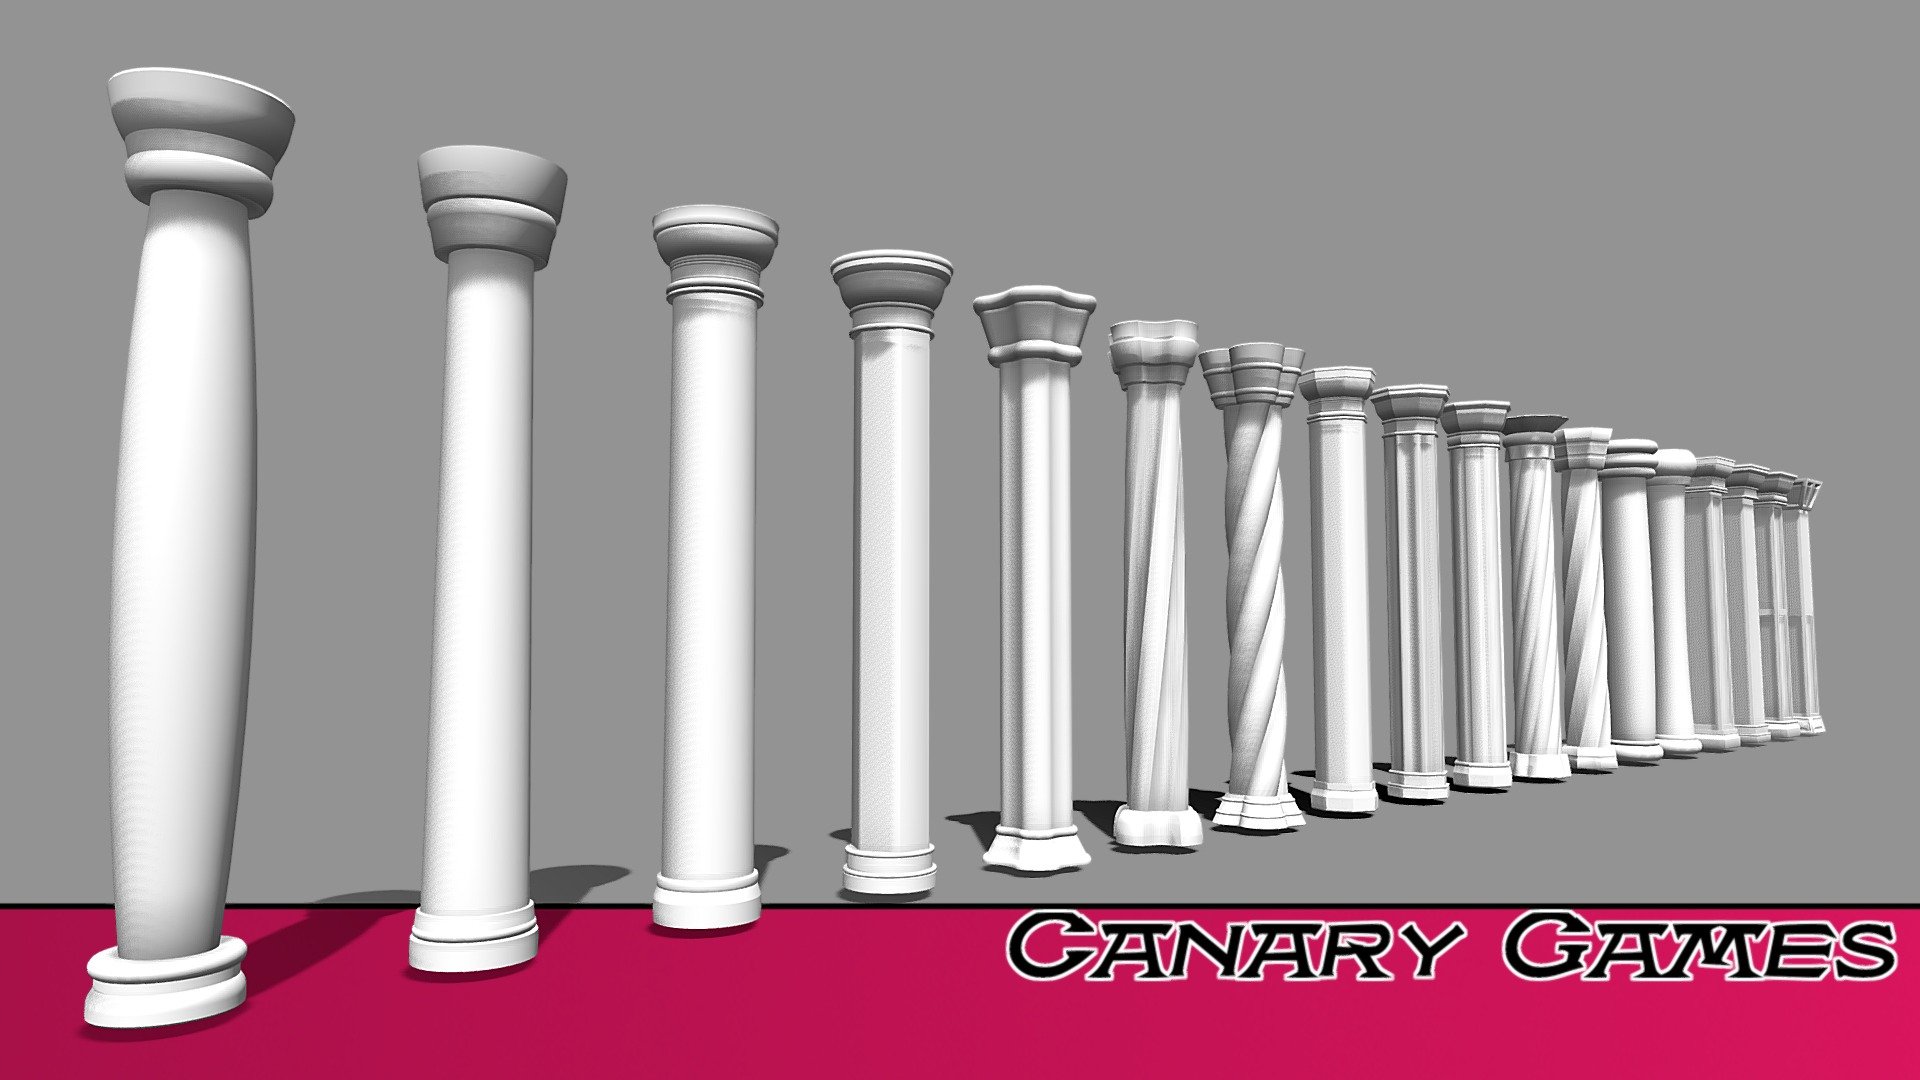 Columnas Pack Completo - Columns Complete Pack


There are 3 sets of columns, each set contains 6 columns.

It consists of 54 pieces in total, although columns formed are 18, many variations can be made.



Additional content:





Textures in 2048px

Textures in 4096px

Layer editing files in format, GIMP and Photoshop.

Editing file for the model, Wings3D format

Text file with detailed information



Here you can see, a little more about this pack:

Columnas Set 1 - Columns Set 1

Columnas Set 2 - Columns Set 2

Columnas Set 3 - Columns Set 3

Columns Set Complete Pack (Prev. Downfall)

Columns Set Complete Pack (Prev. Exposition)
 - Columnas Pack Completo - Columns Complete Pack - Buy Royalty Free 3D model by Canary Games (@CanaryGames) 3d model